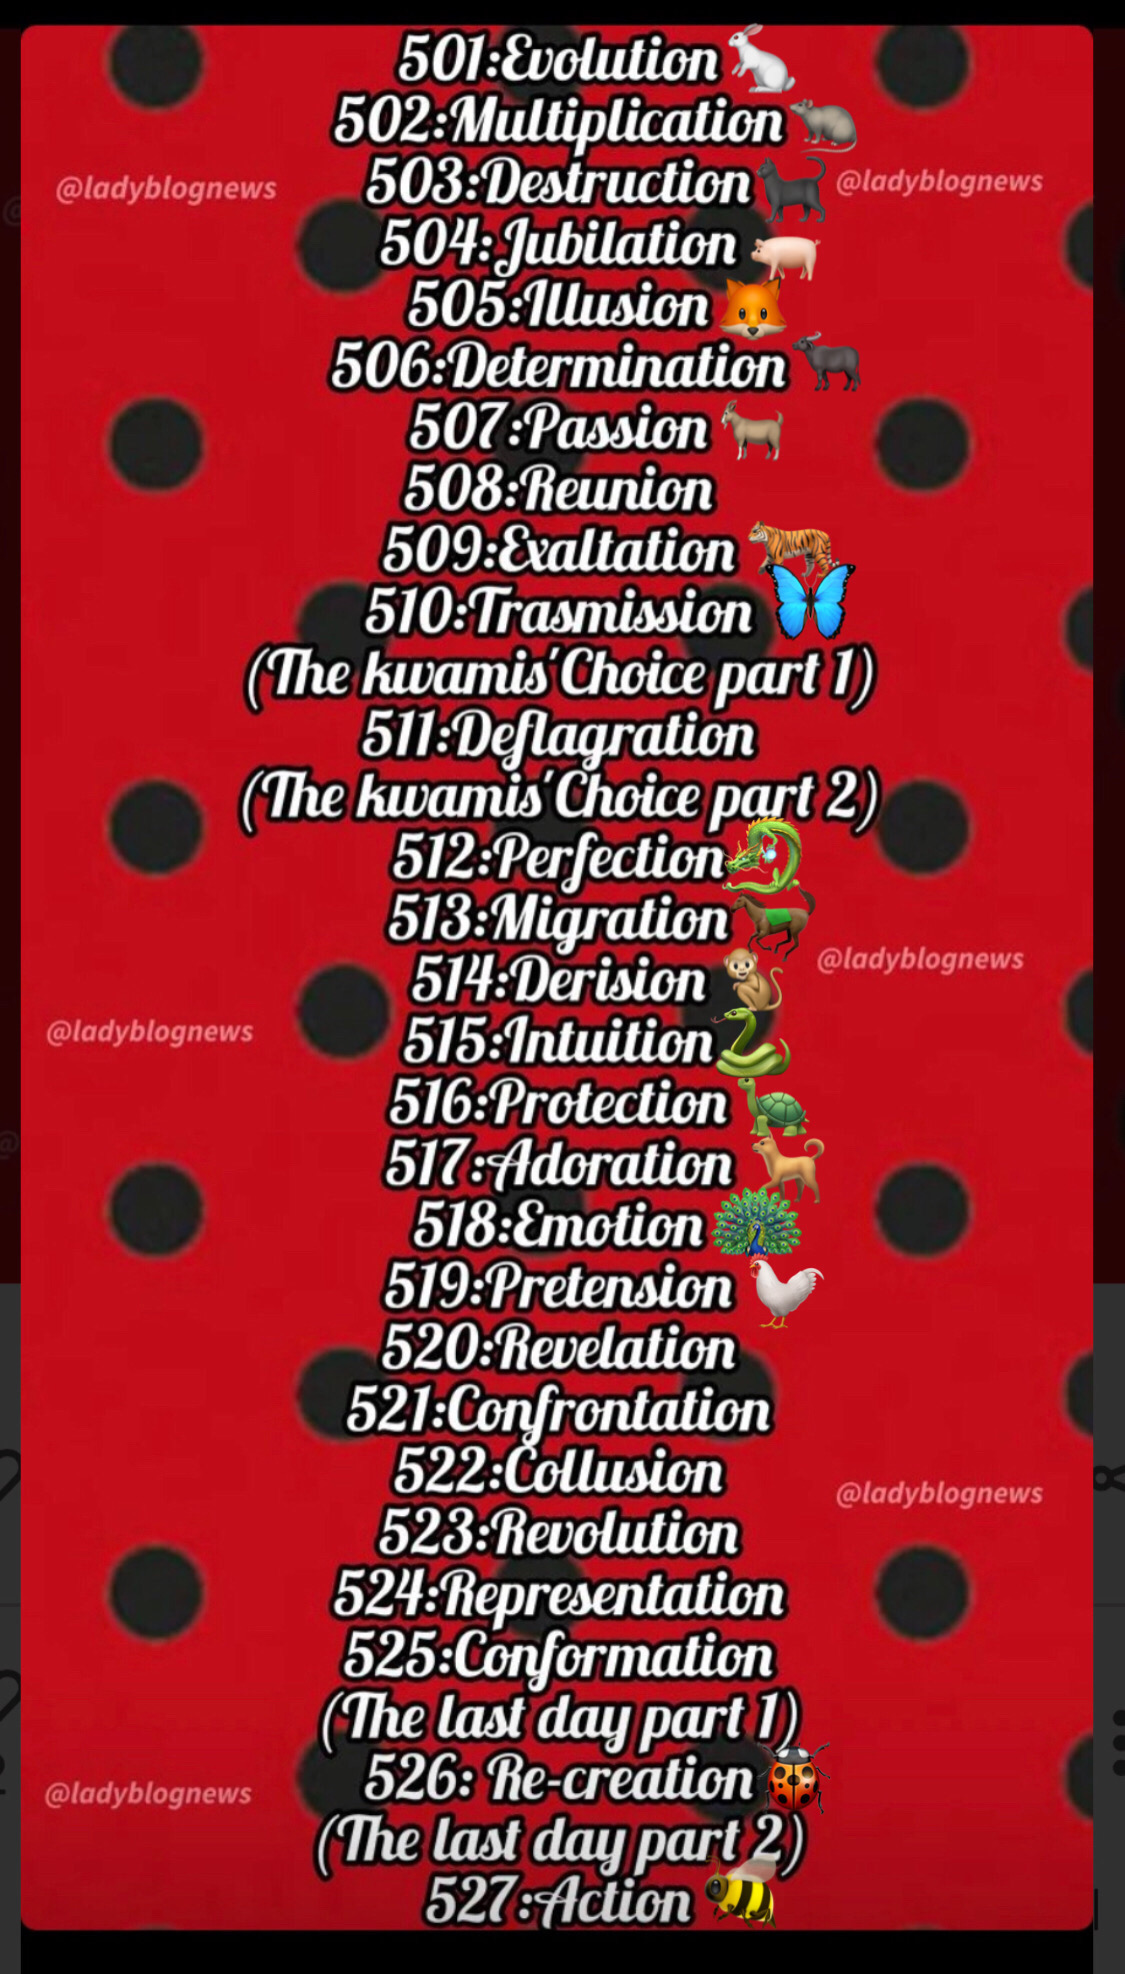 Season 5 titles are out so i made my prediction for them, more details in  comments because Spoilers : r/miraculousladybug